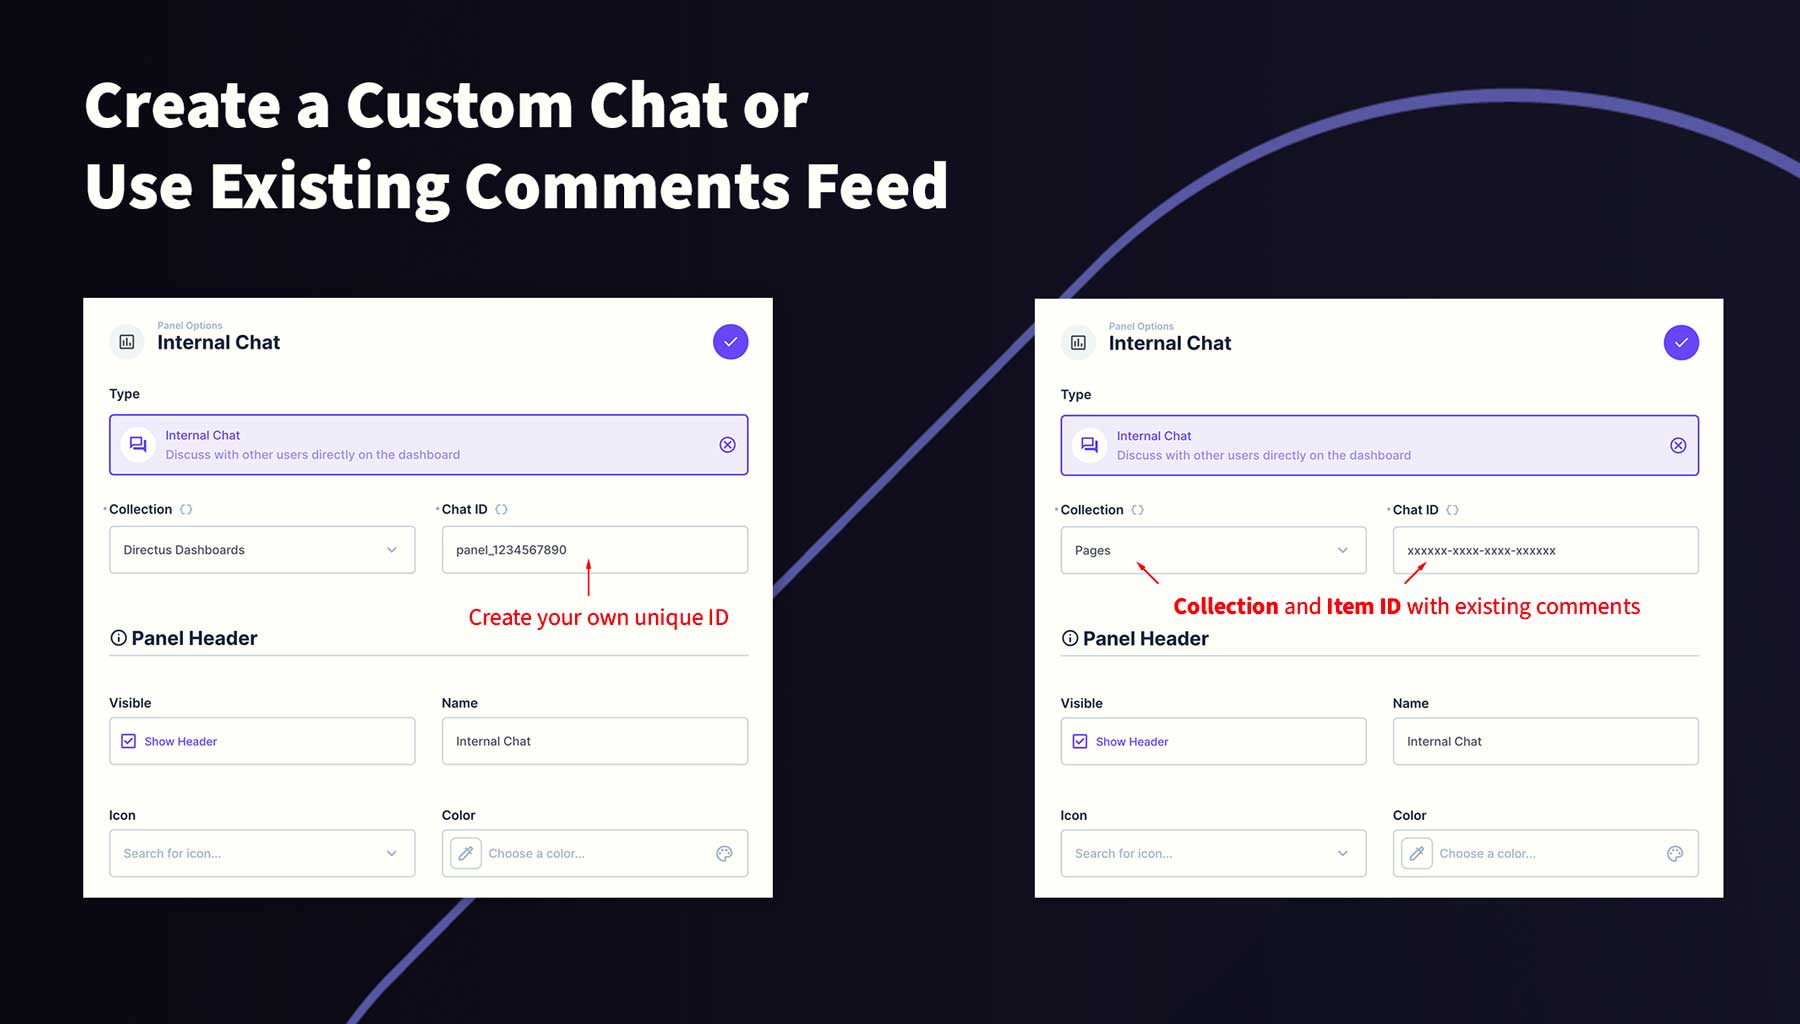 Create custom chat or use existing comments